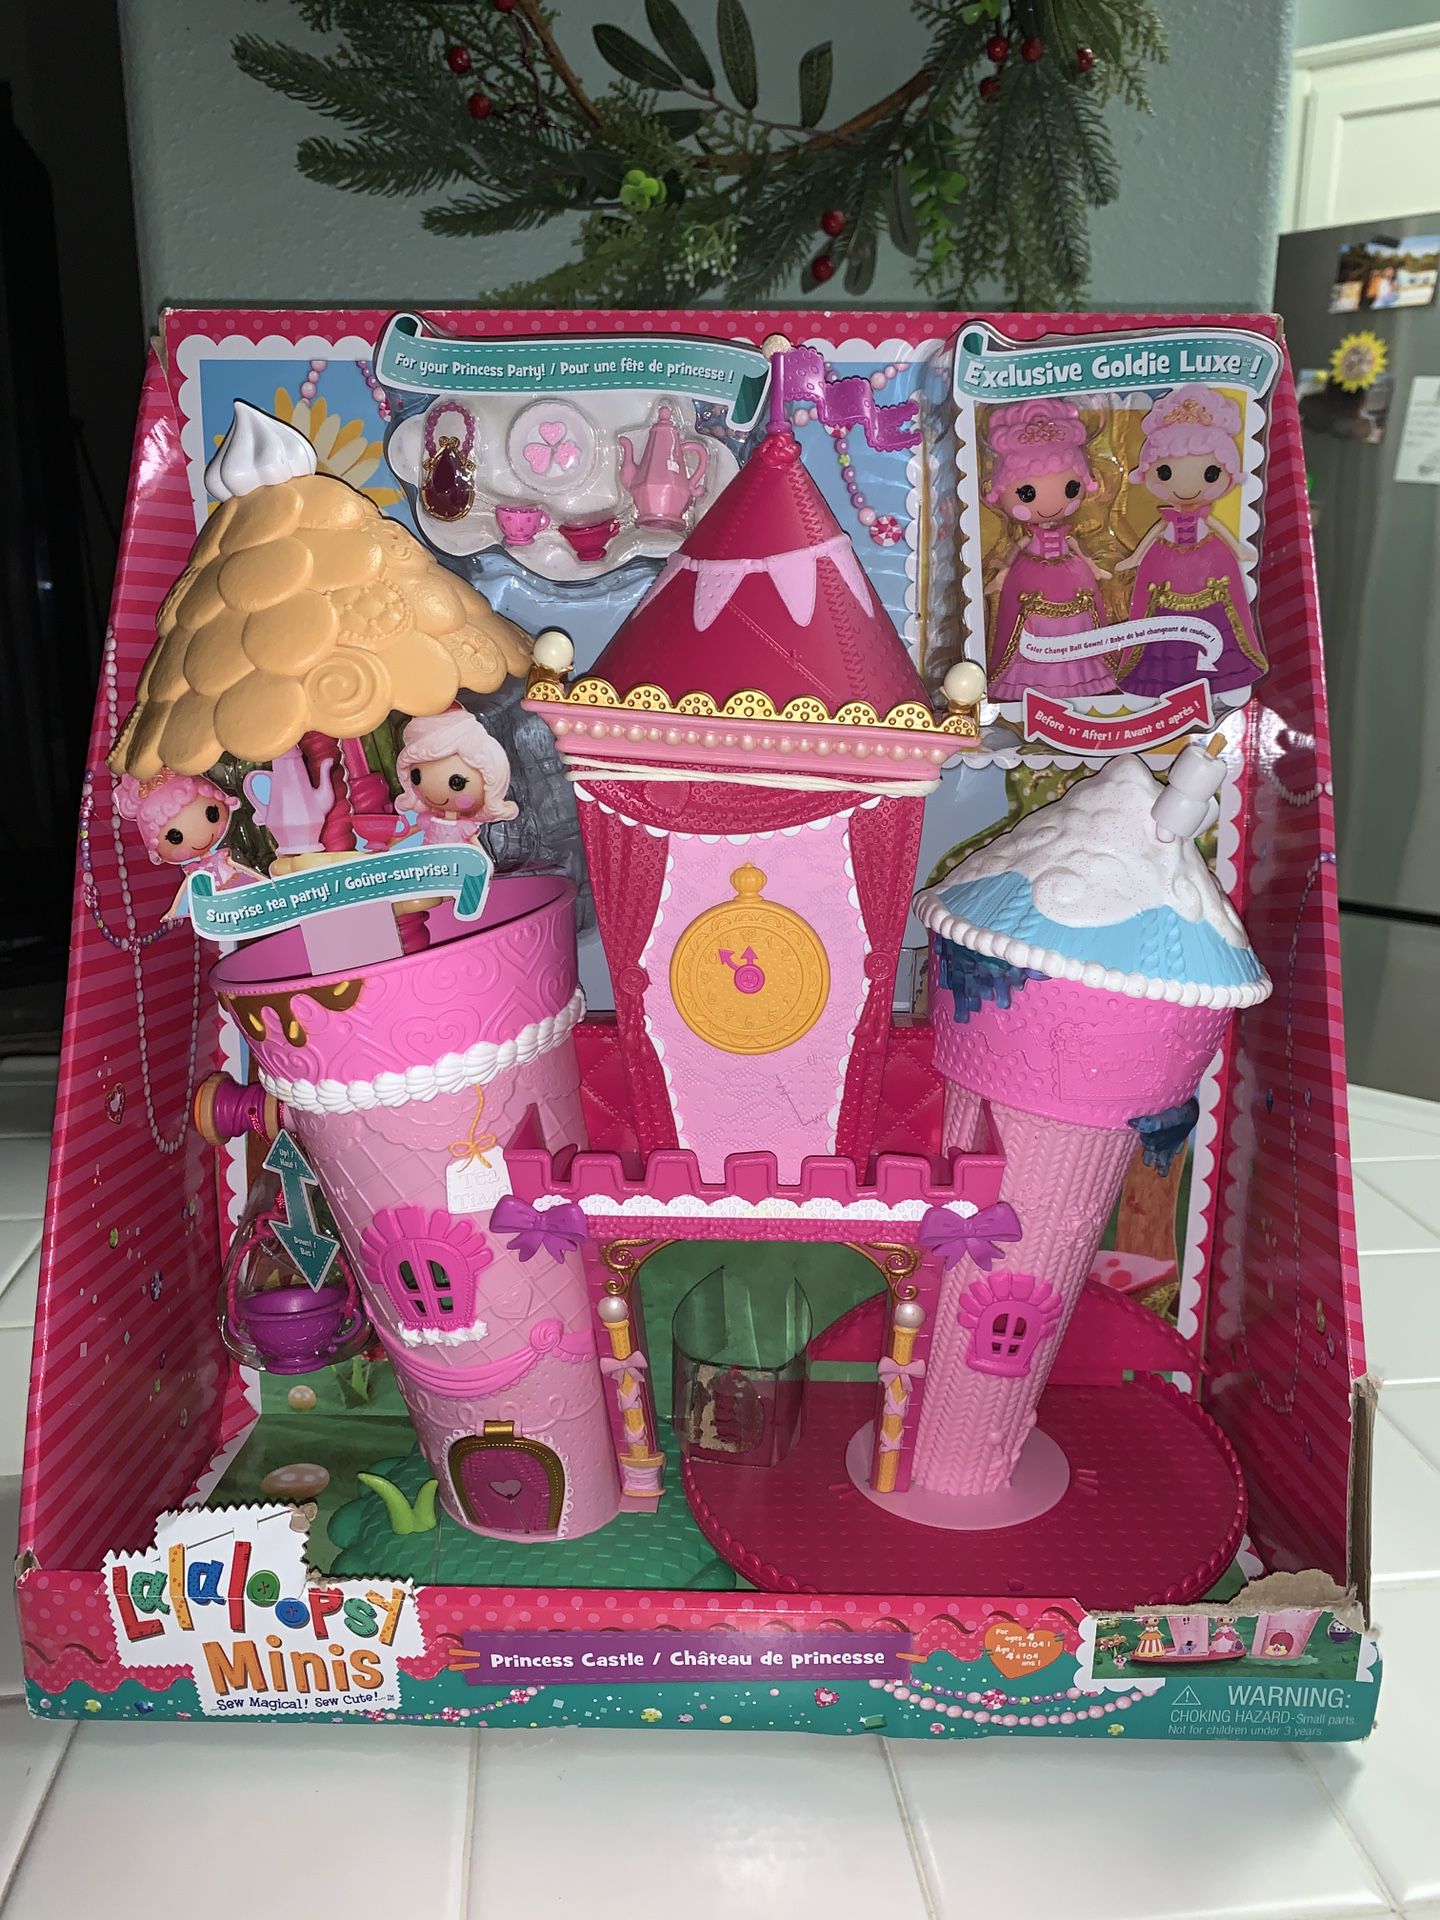 NEW MGA Lalaloopsy Minis Princess Castle w/ Exclusive Goldie Lux Doll Tea Party